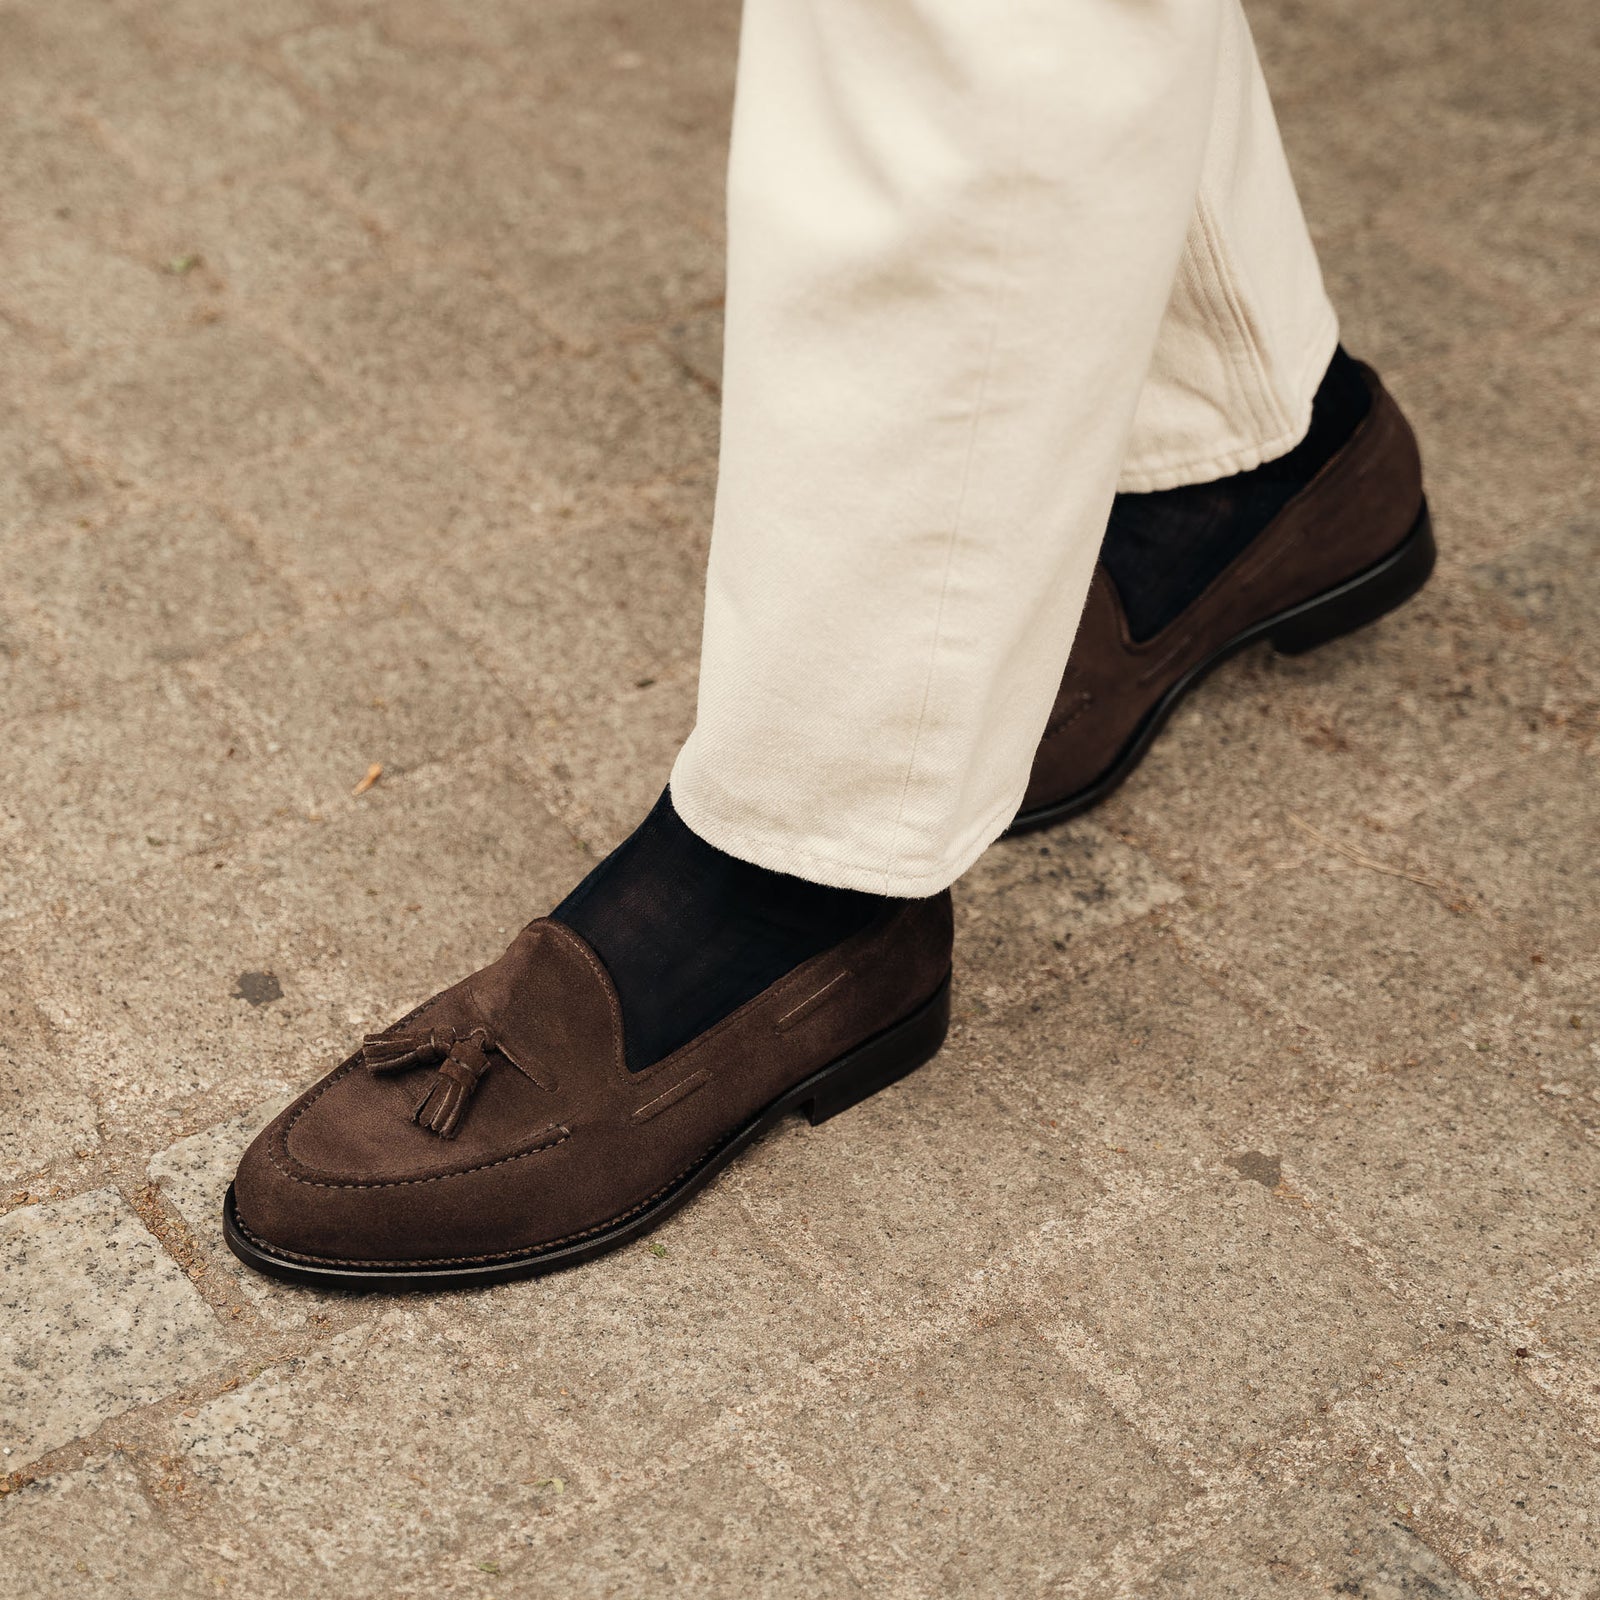 Men’s suede leather Loafers with Tassels | Velasca